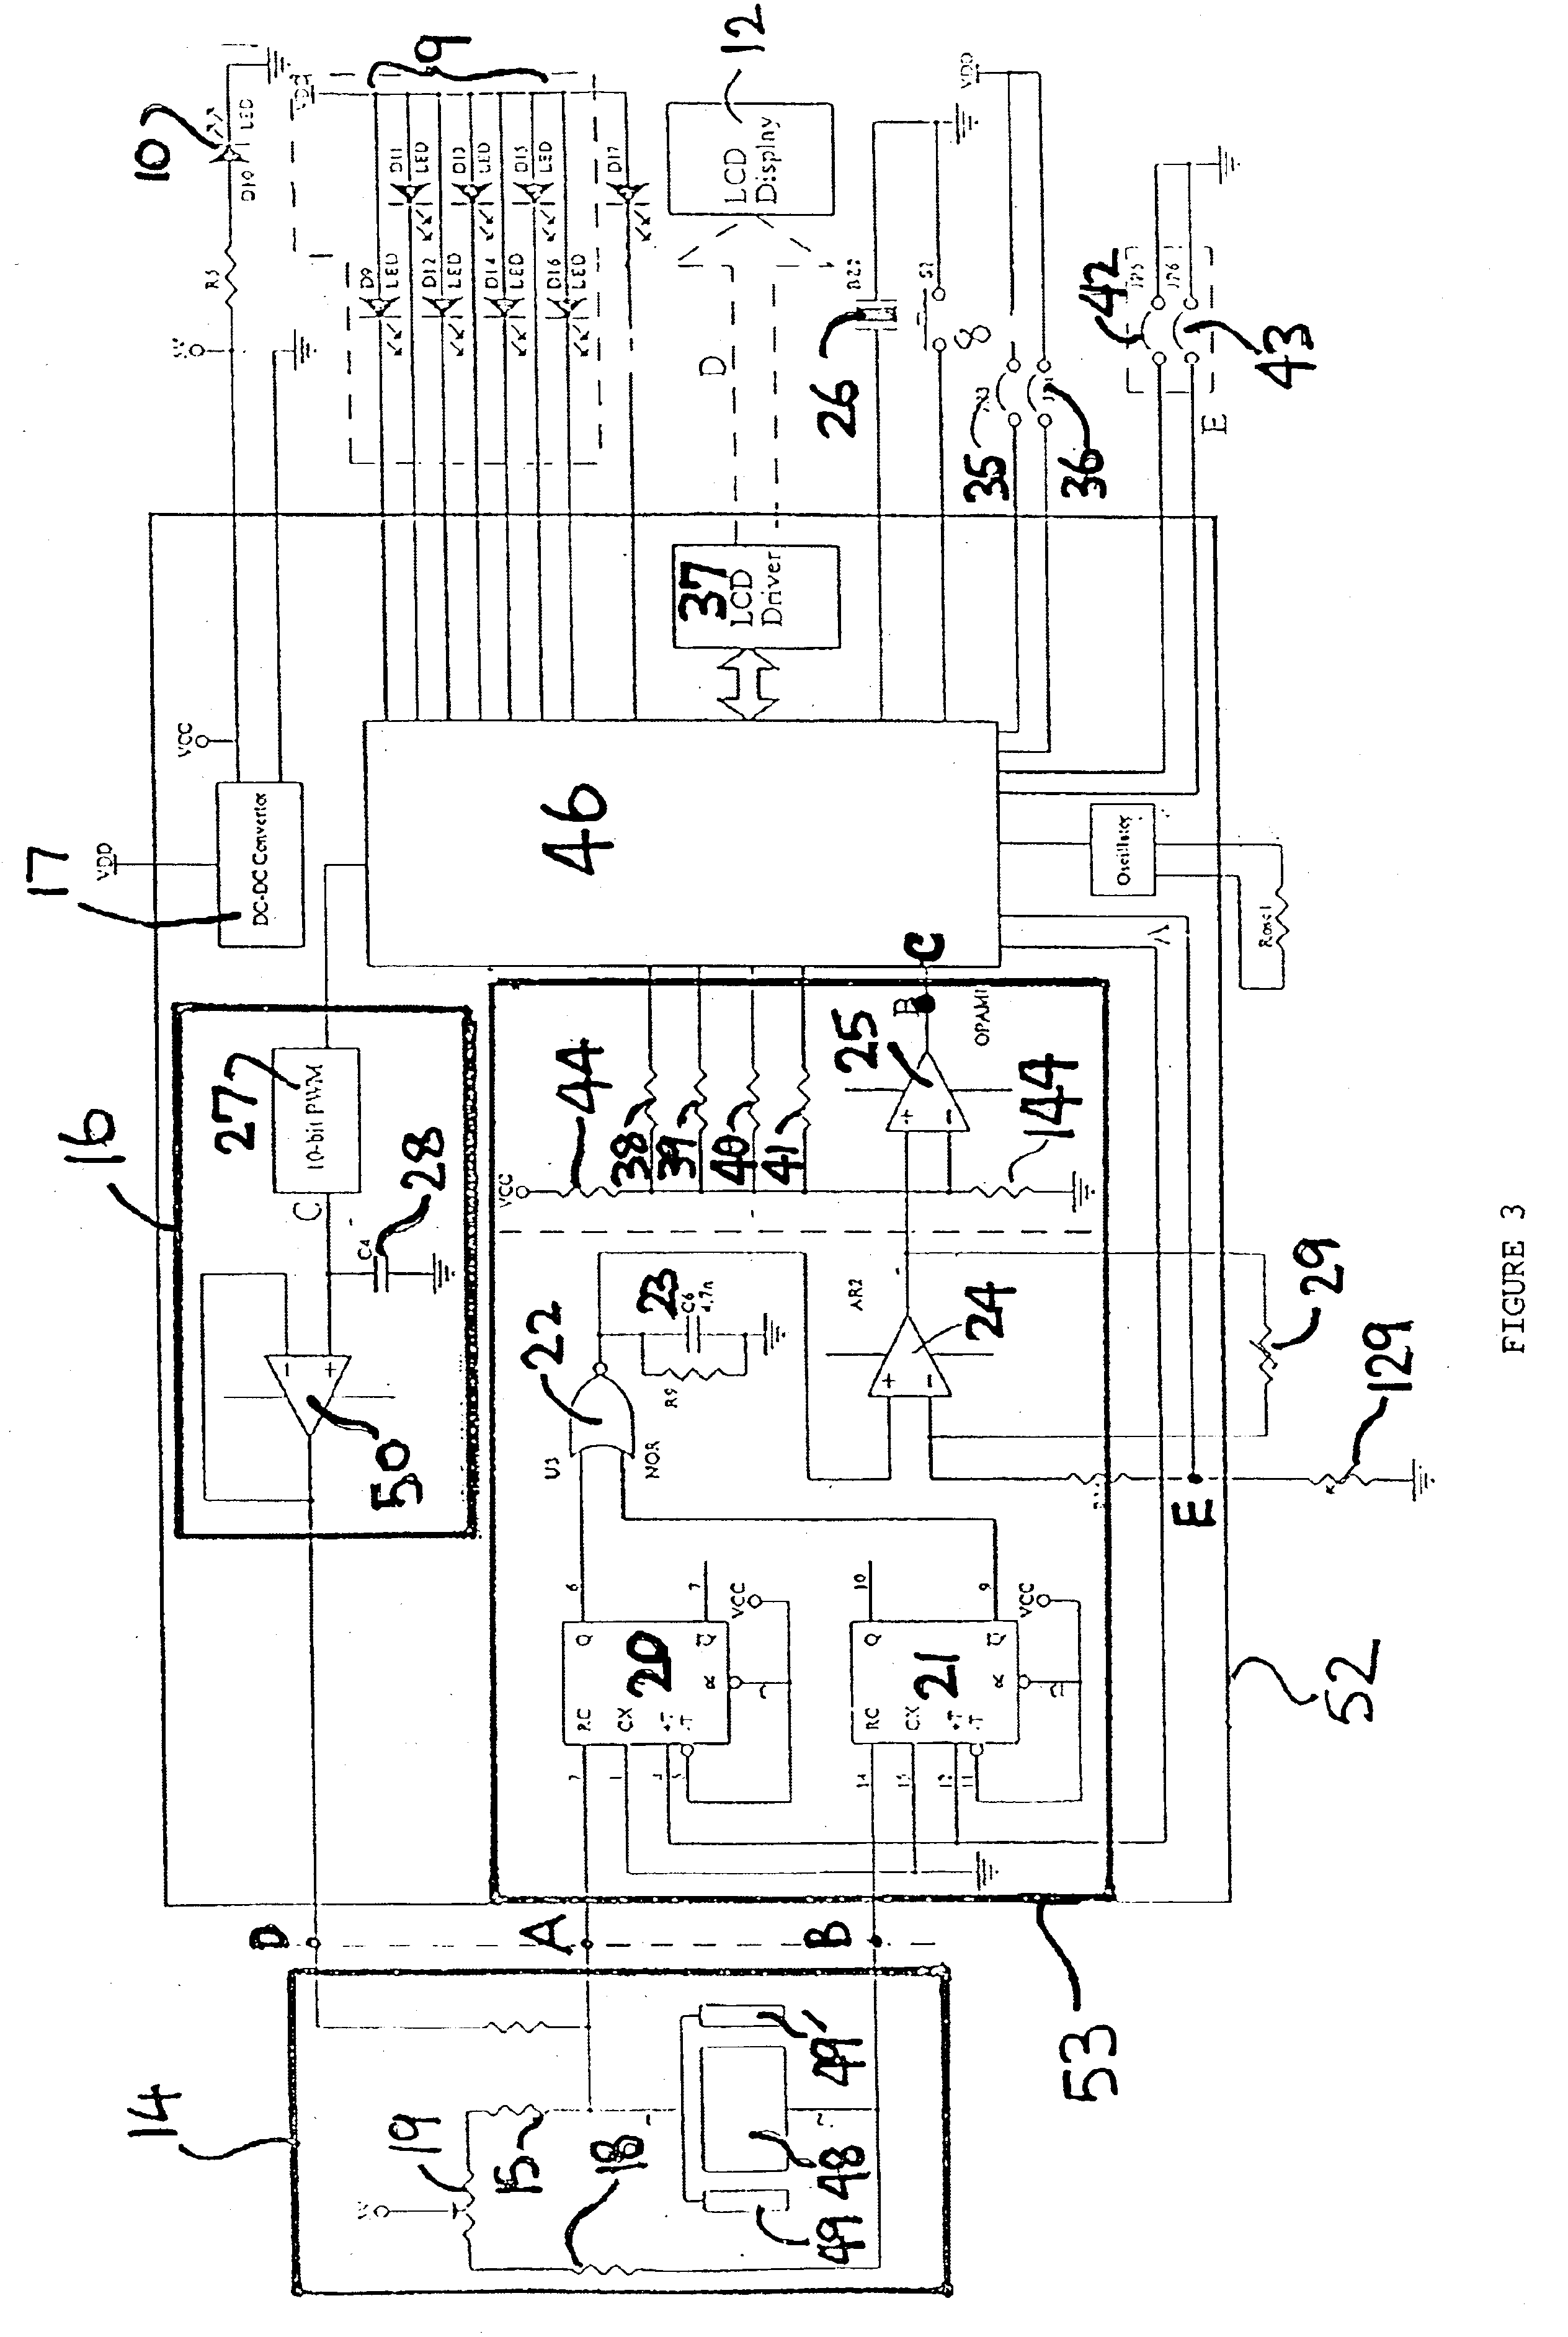 Apparatus and method for locating objects behind a wall lining